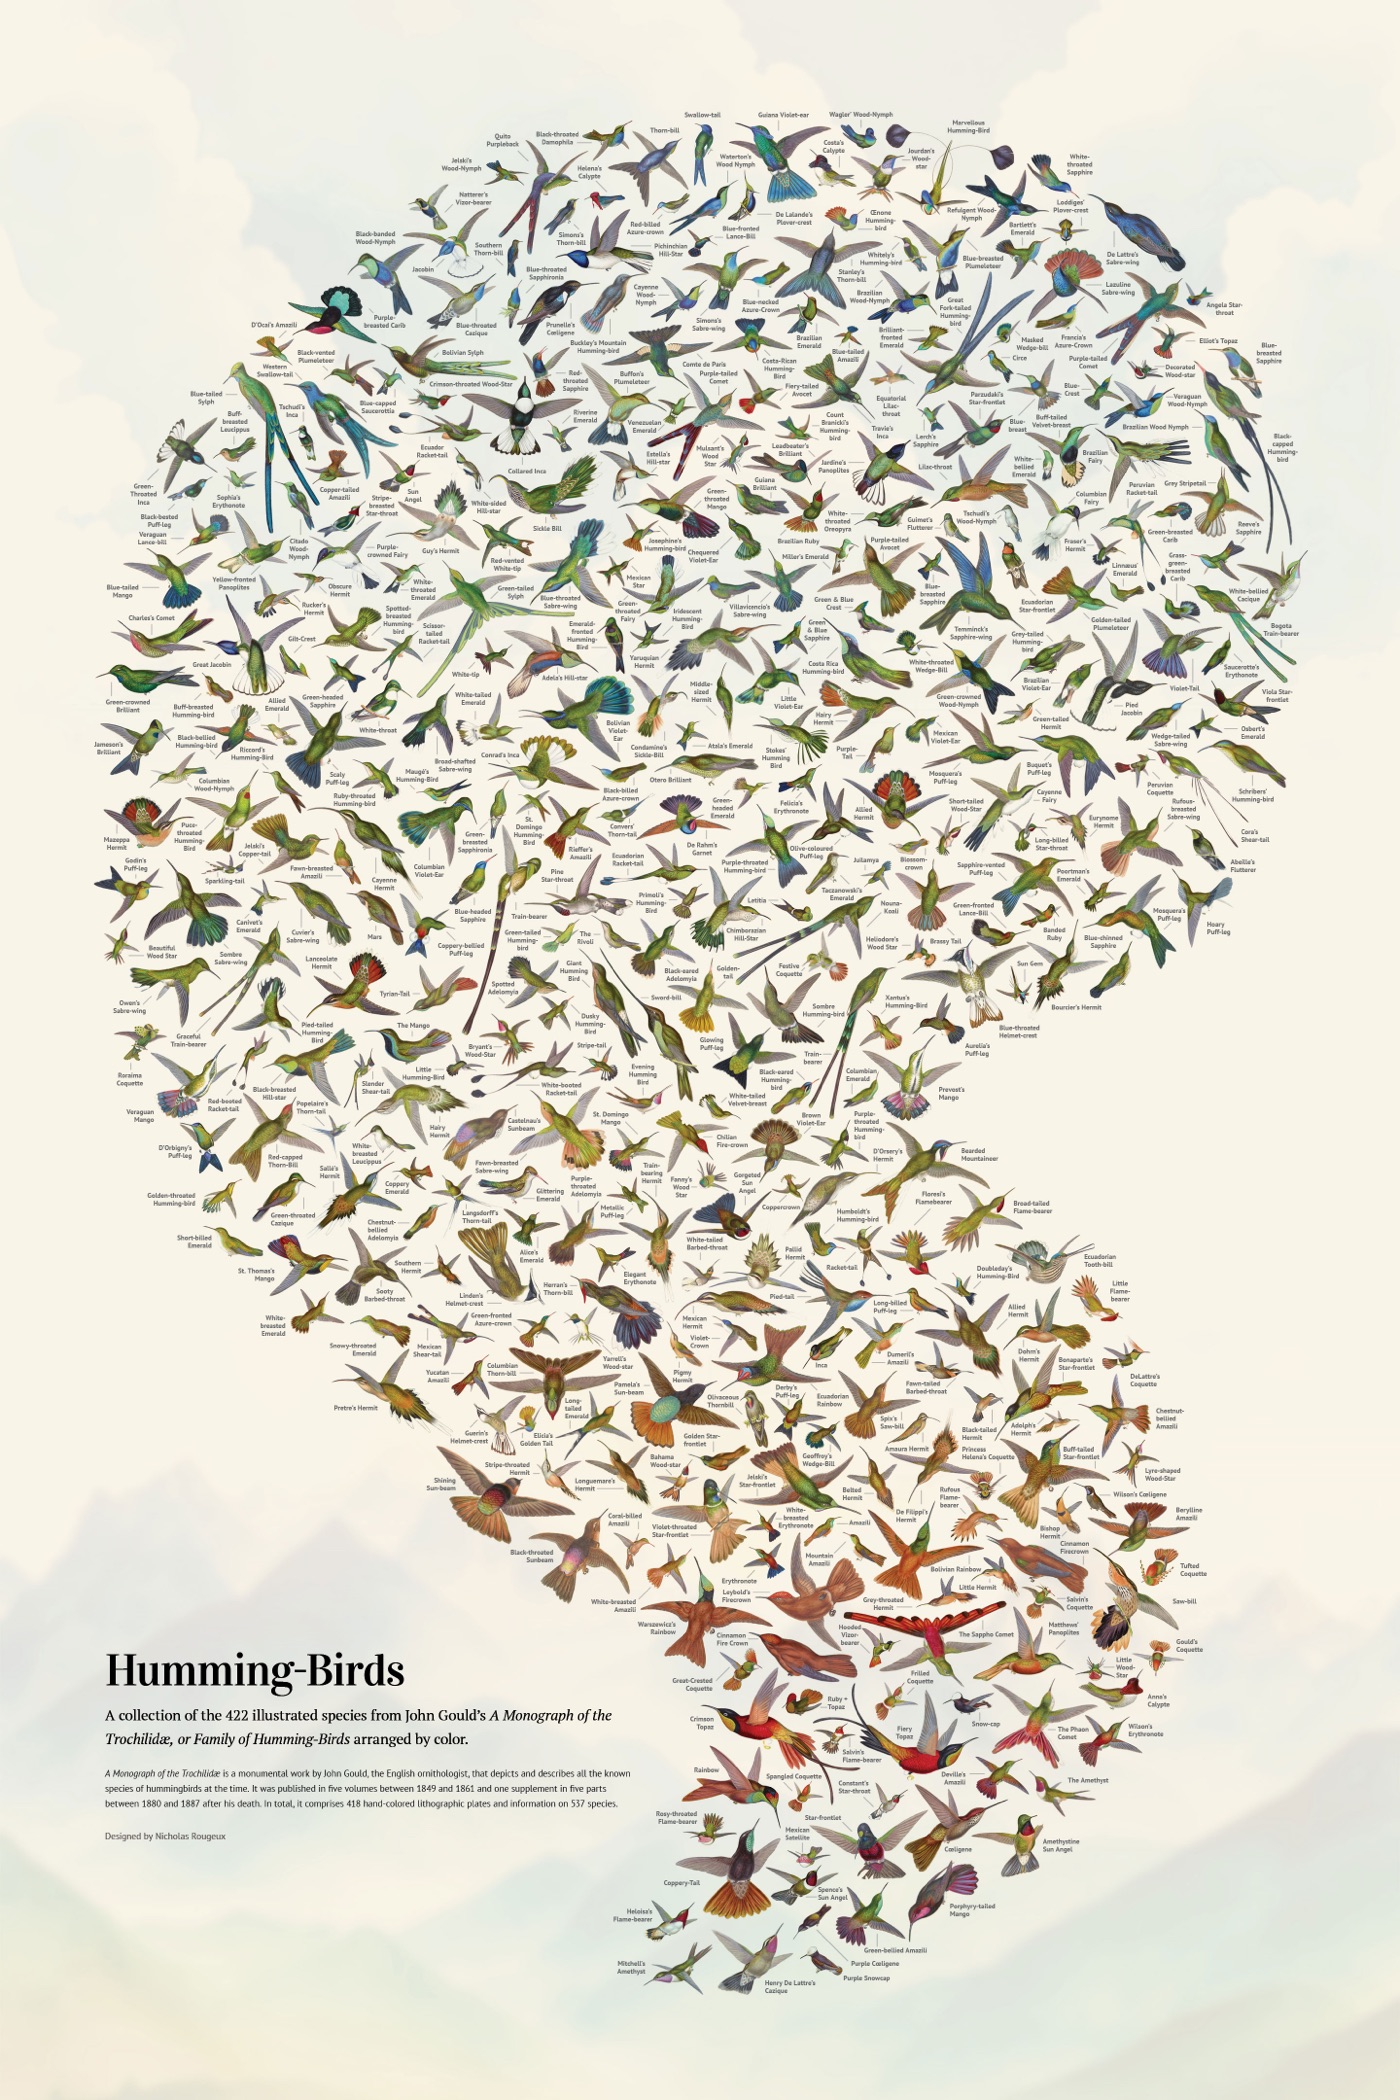 a poster depicting hundreds of hummingbirds in a swarm